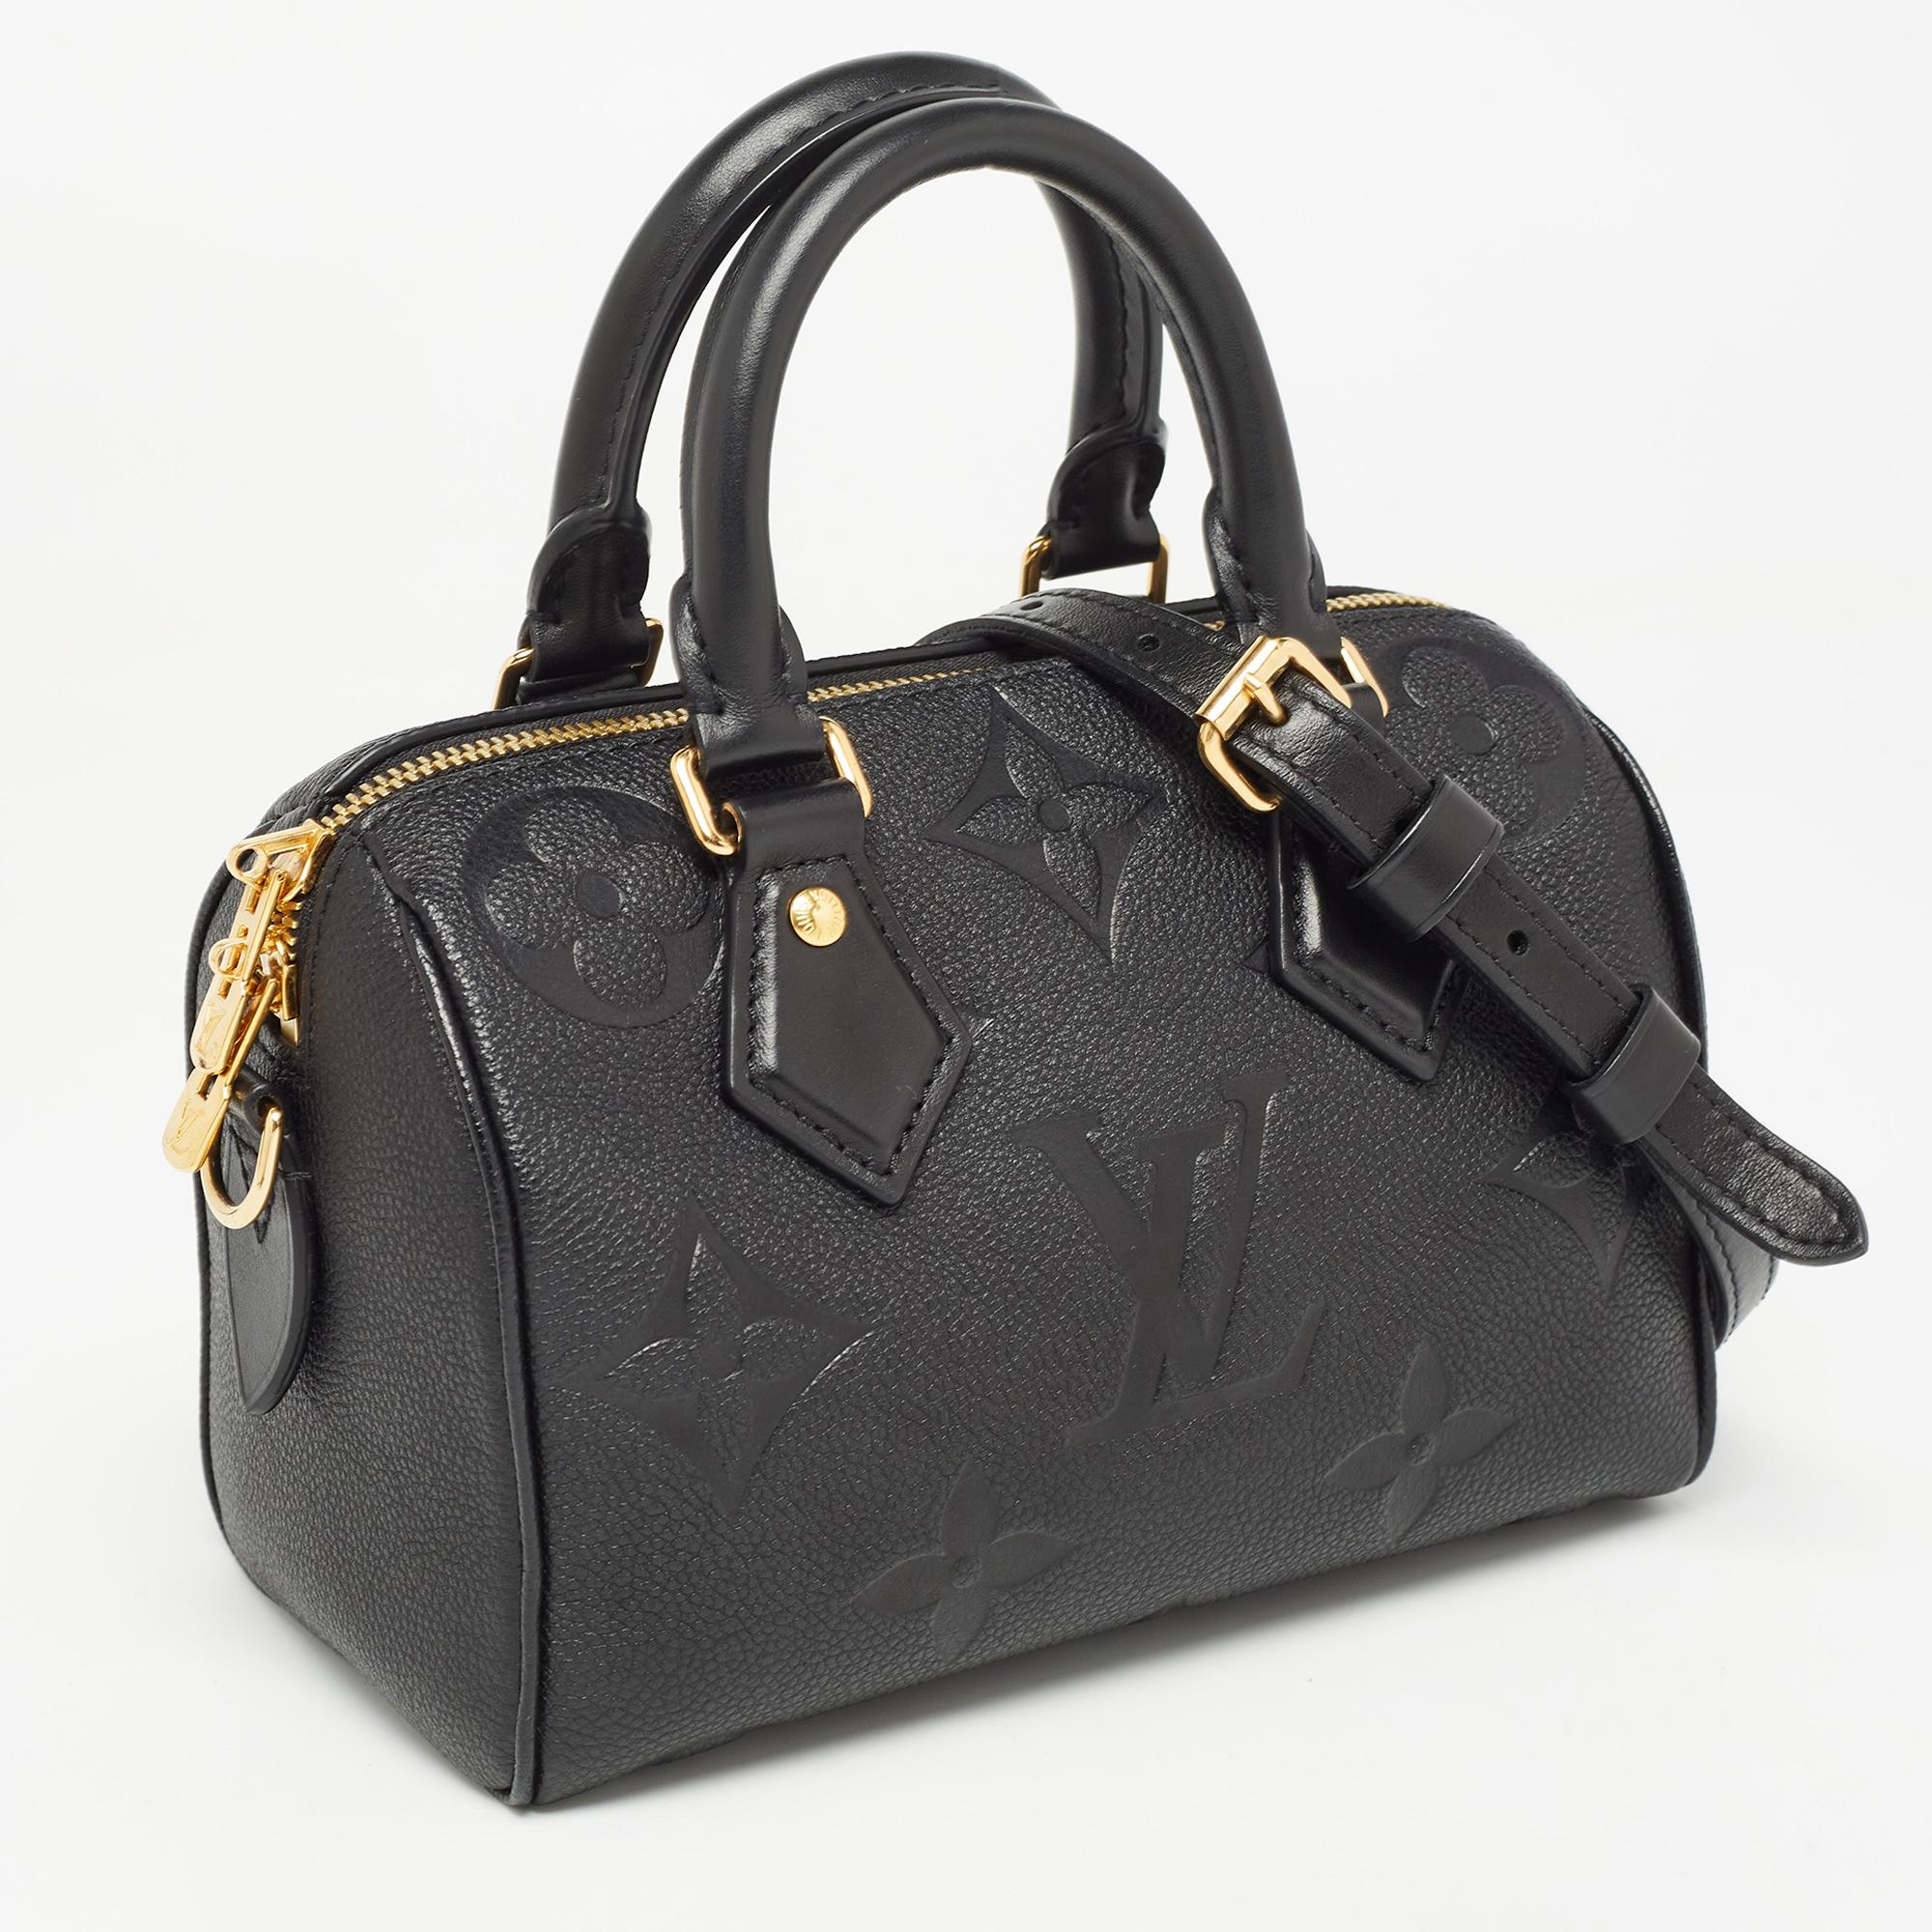 Indulge in timeless luxury with this Louis Vuitton bag. Meticulously crafted, this iconic piece combines heritage, elegance, and craftsmanship, elevating your style to a level of unmatched sophistication.

